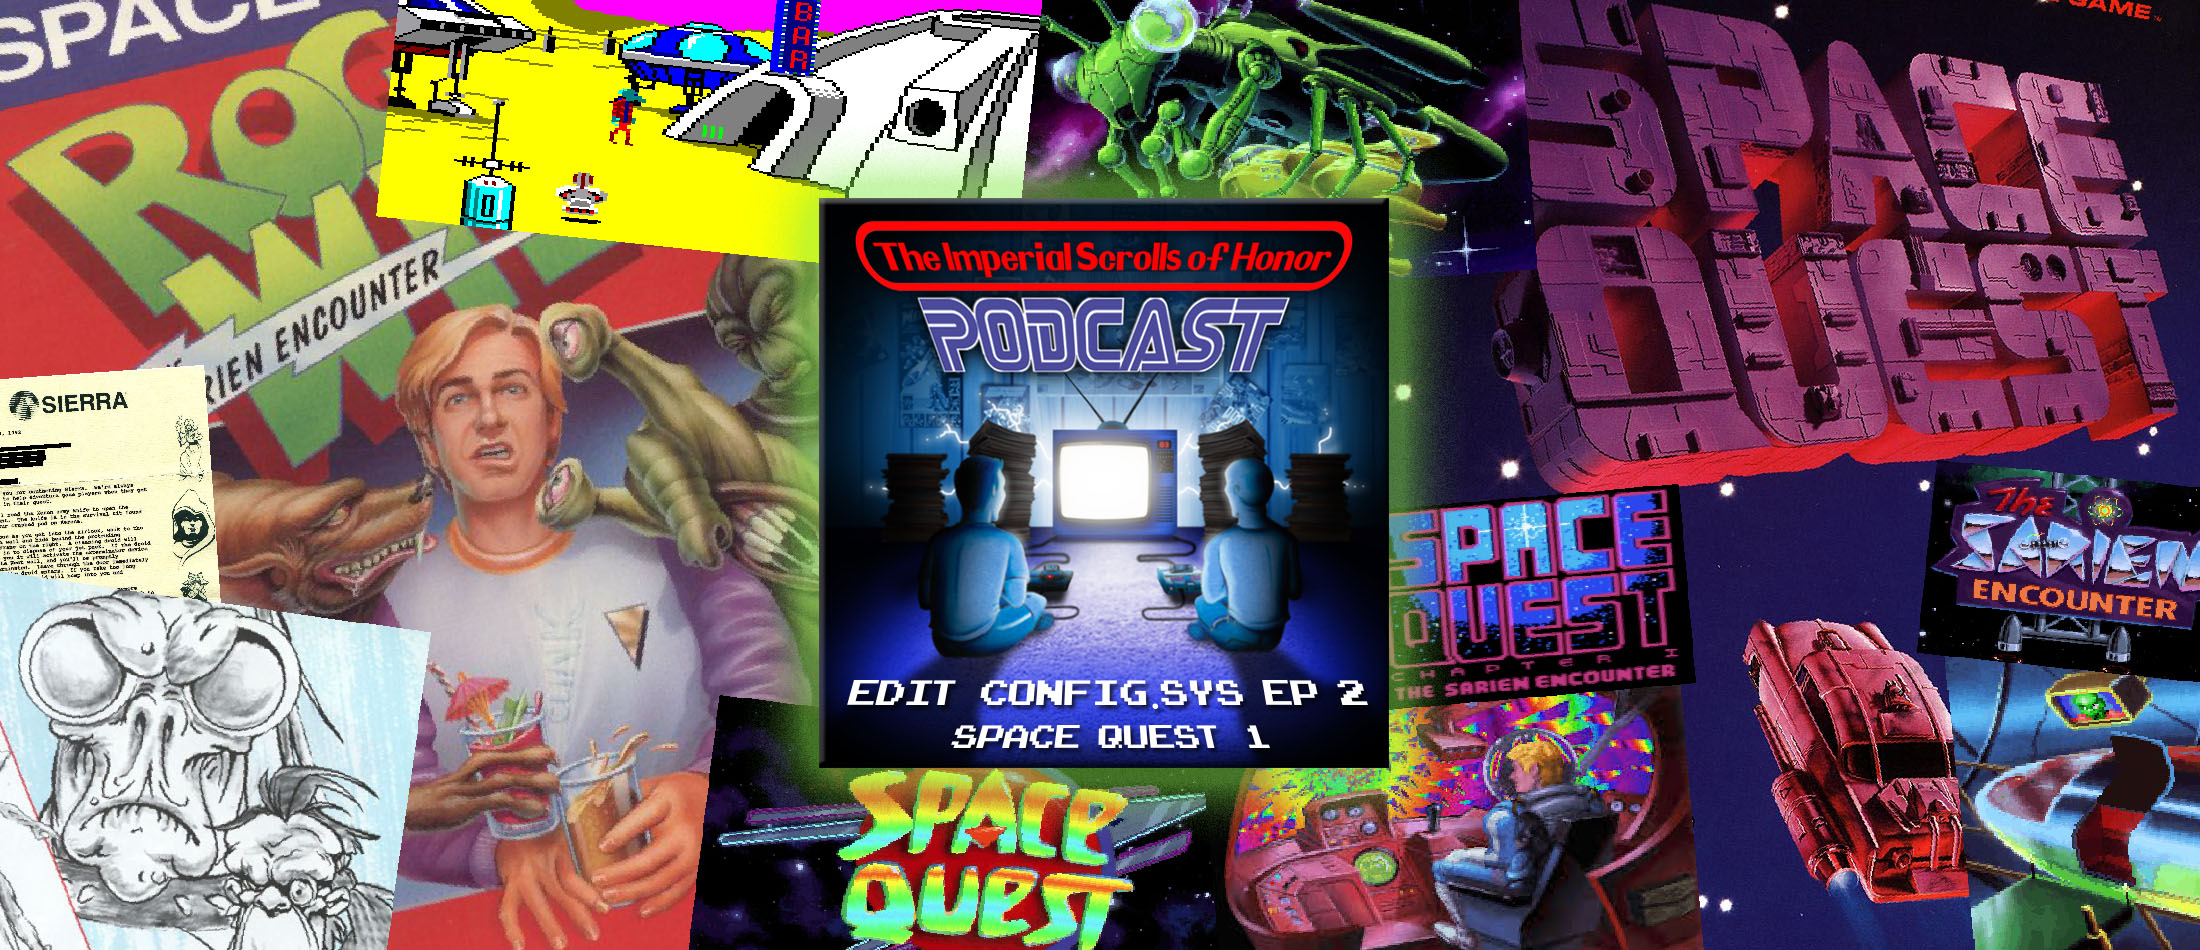 The Imperial Scrolls of Honor Podcast - EDIT CONFIG.SYS QUEST Ep 2 - Space Quest I: Roger Wilco in the Sarien Encounter